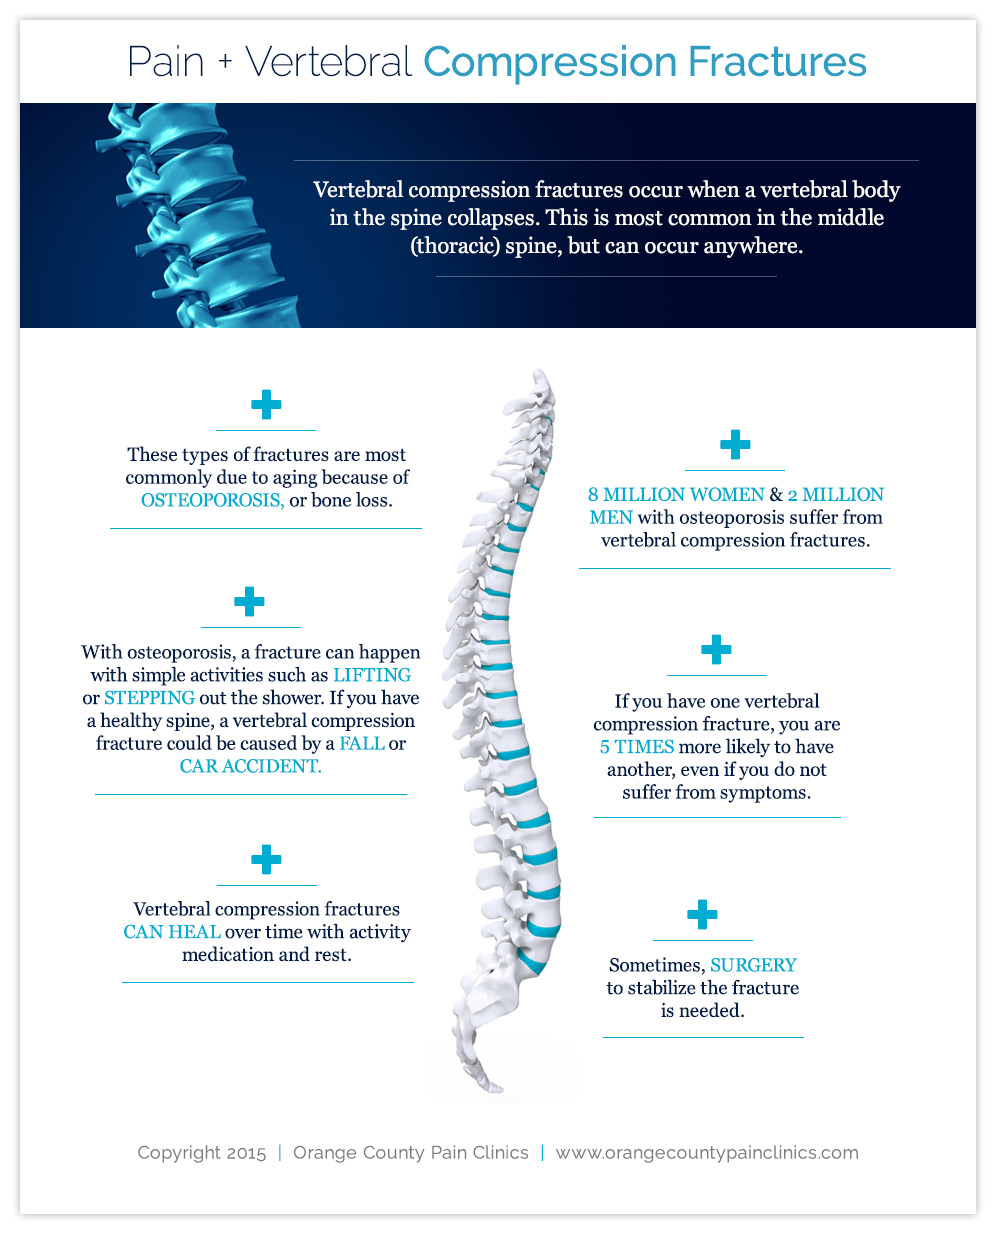 Pain-and-Vertebral-Compression-Fractures-by-OC-Pain-Clinics